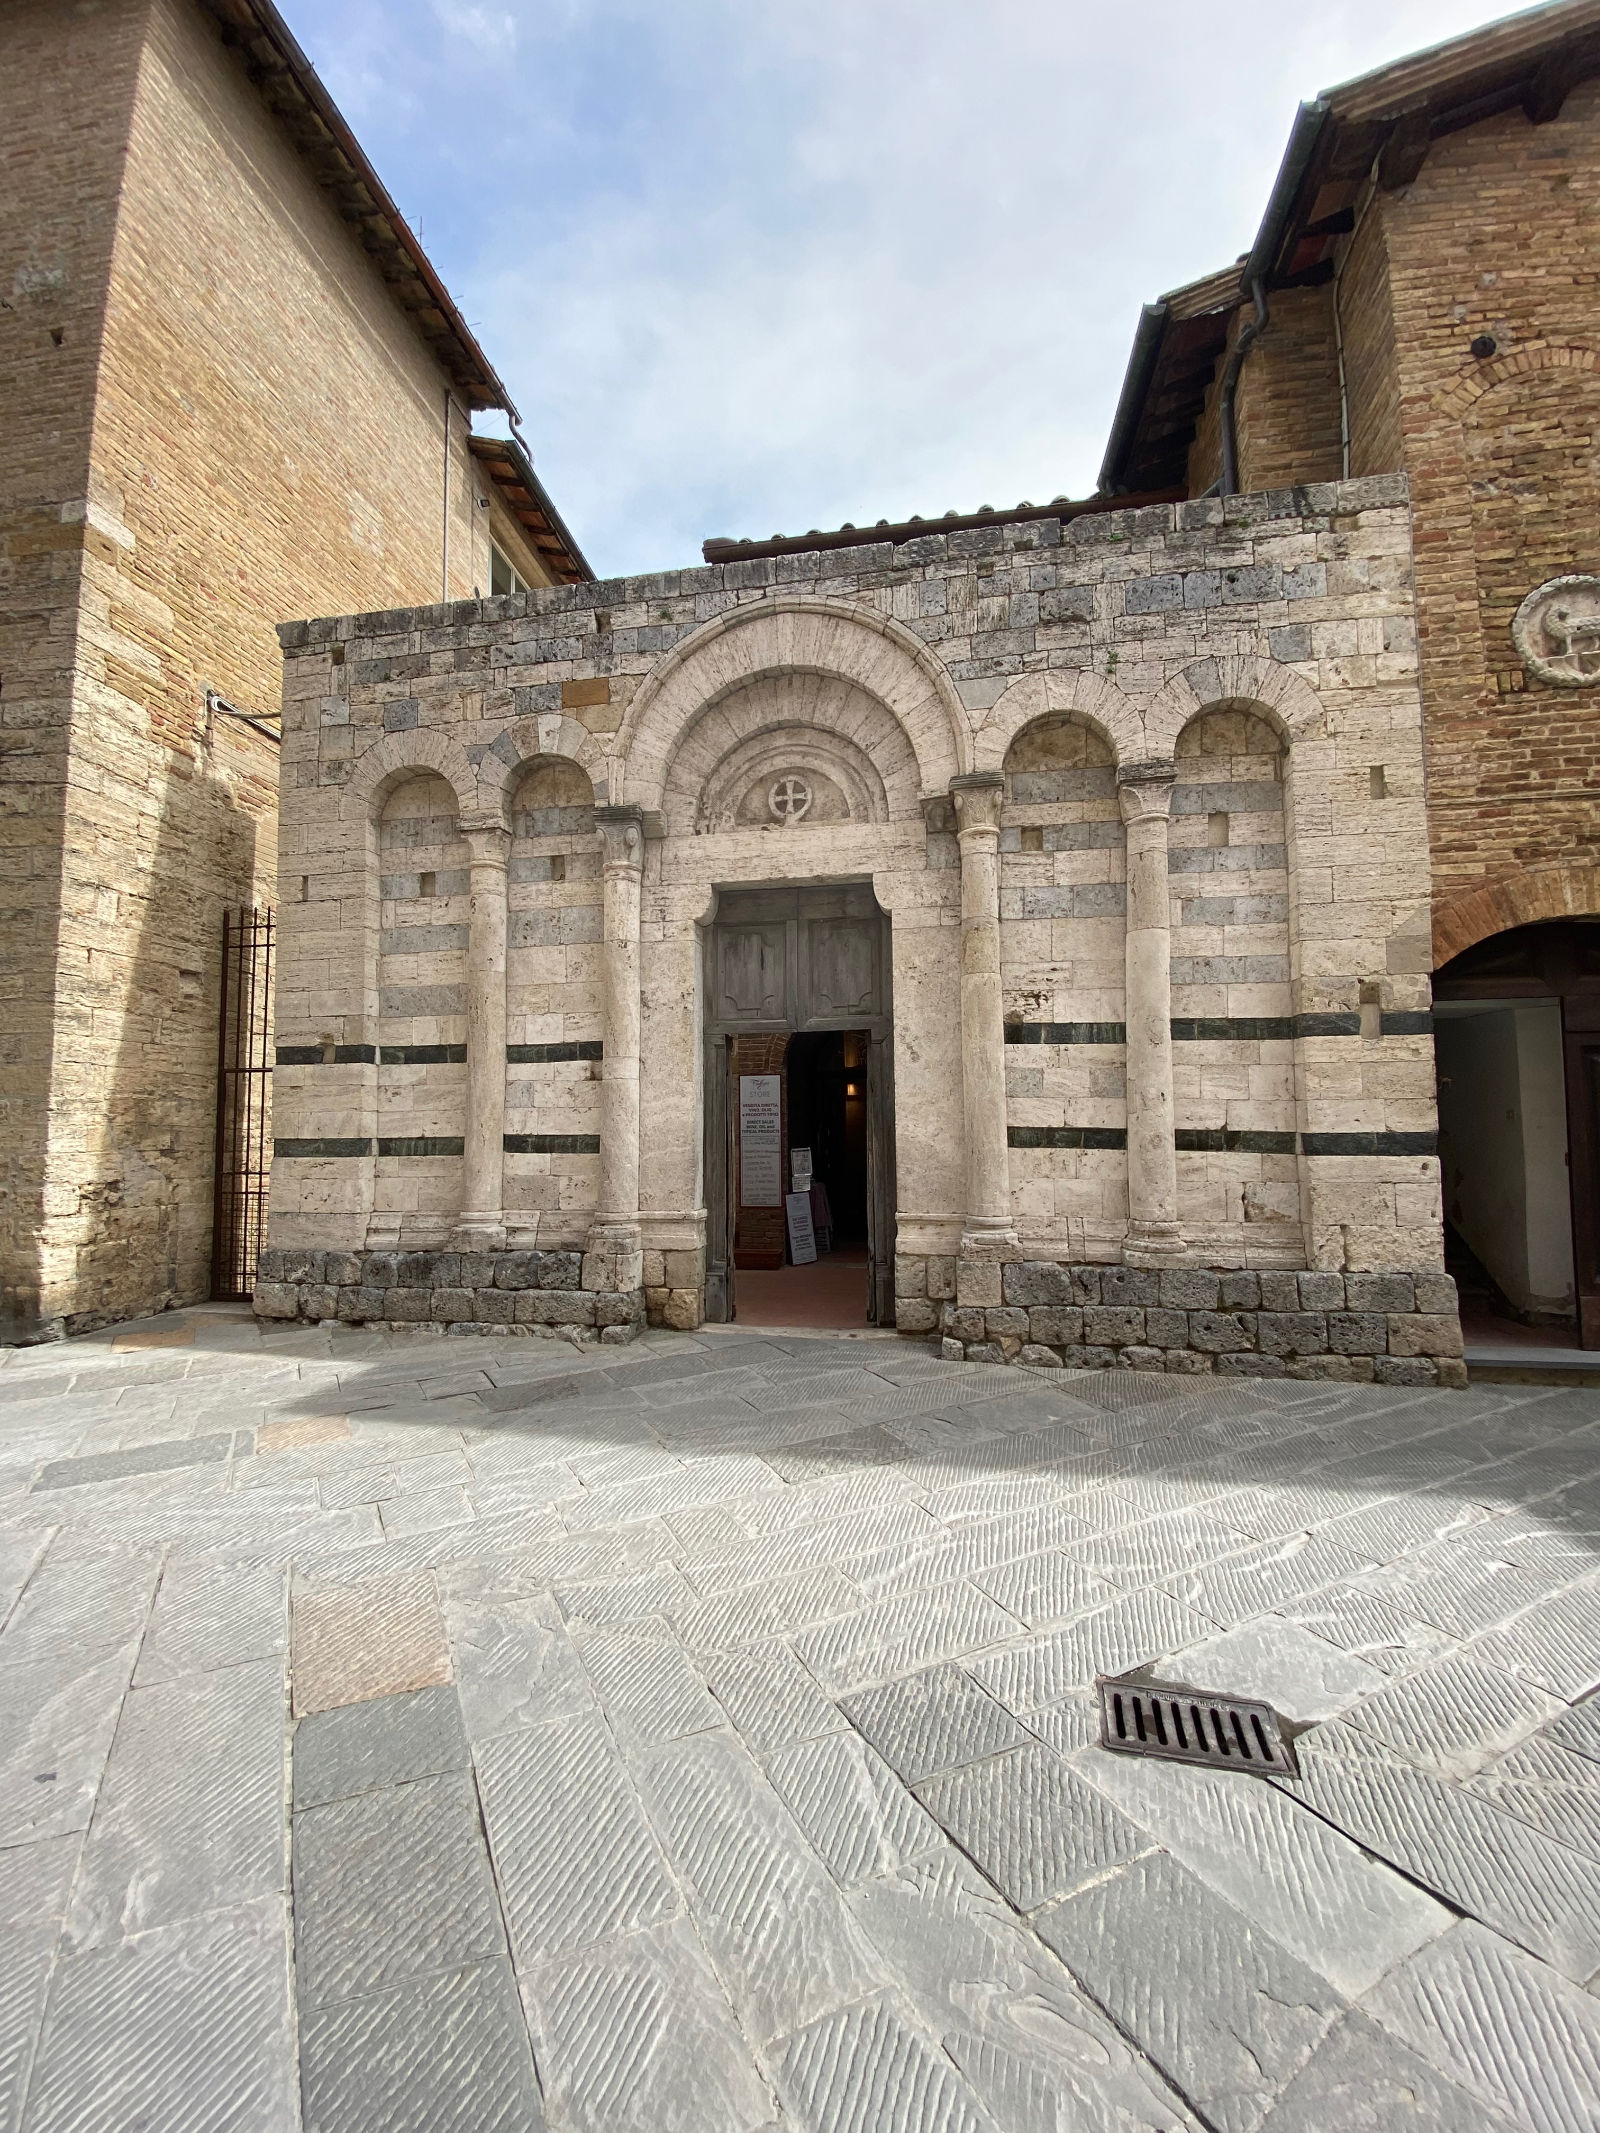 Why and how did people live vertically in San Gimignano?